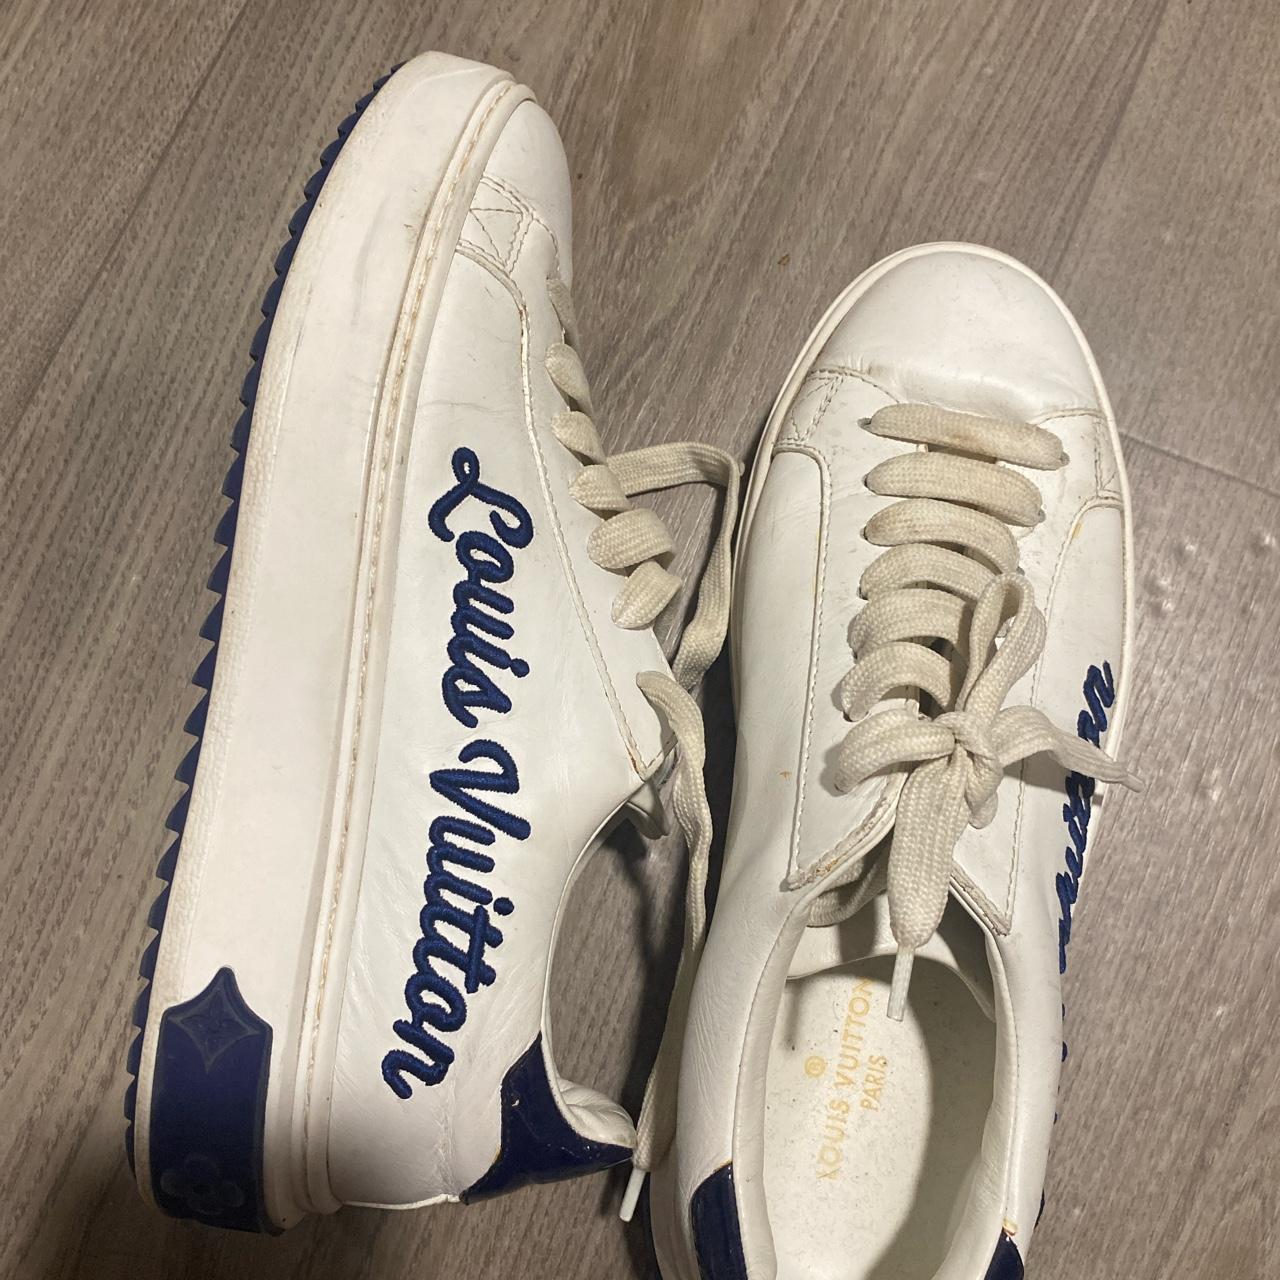 louis vuitton ' blue white ' shoes , hard to find - Depop